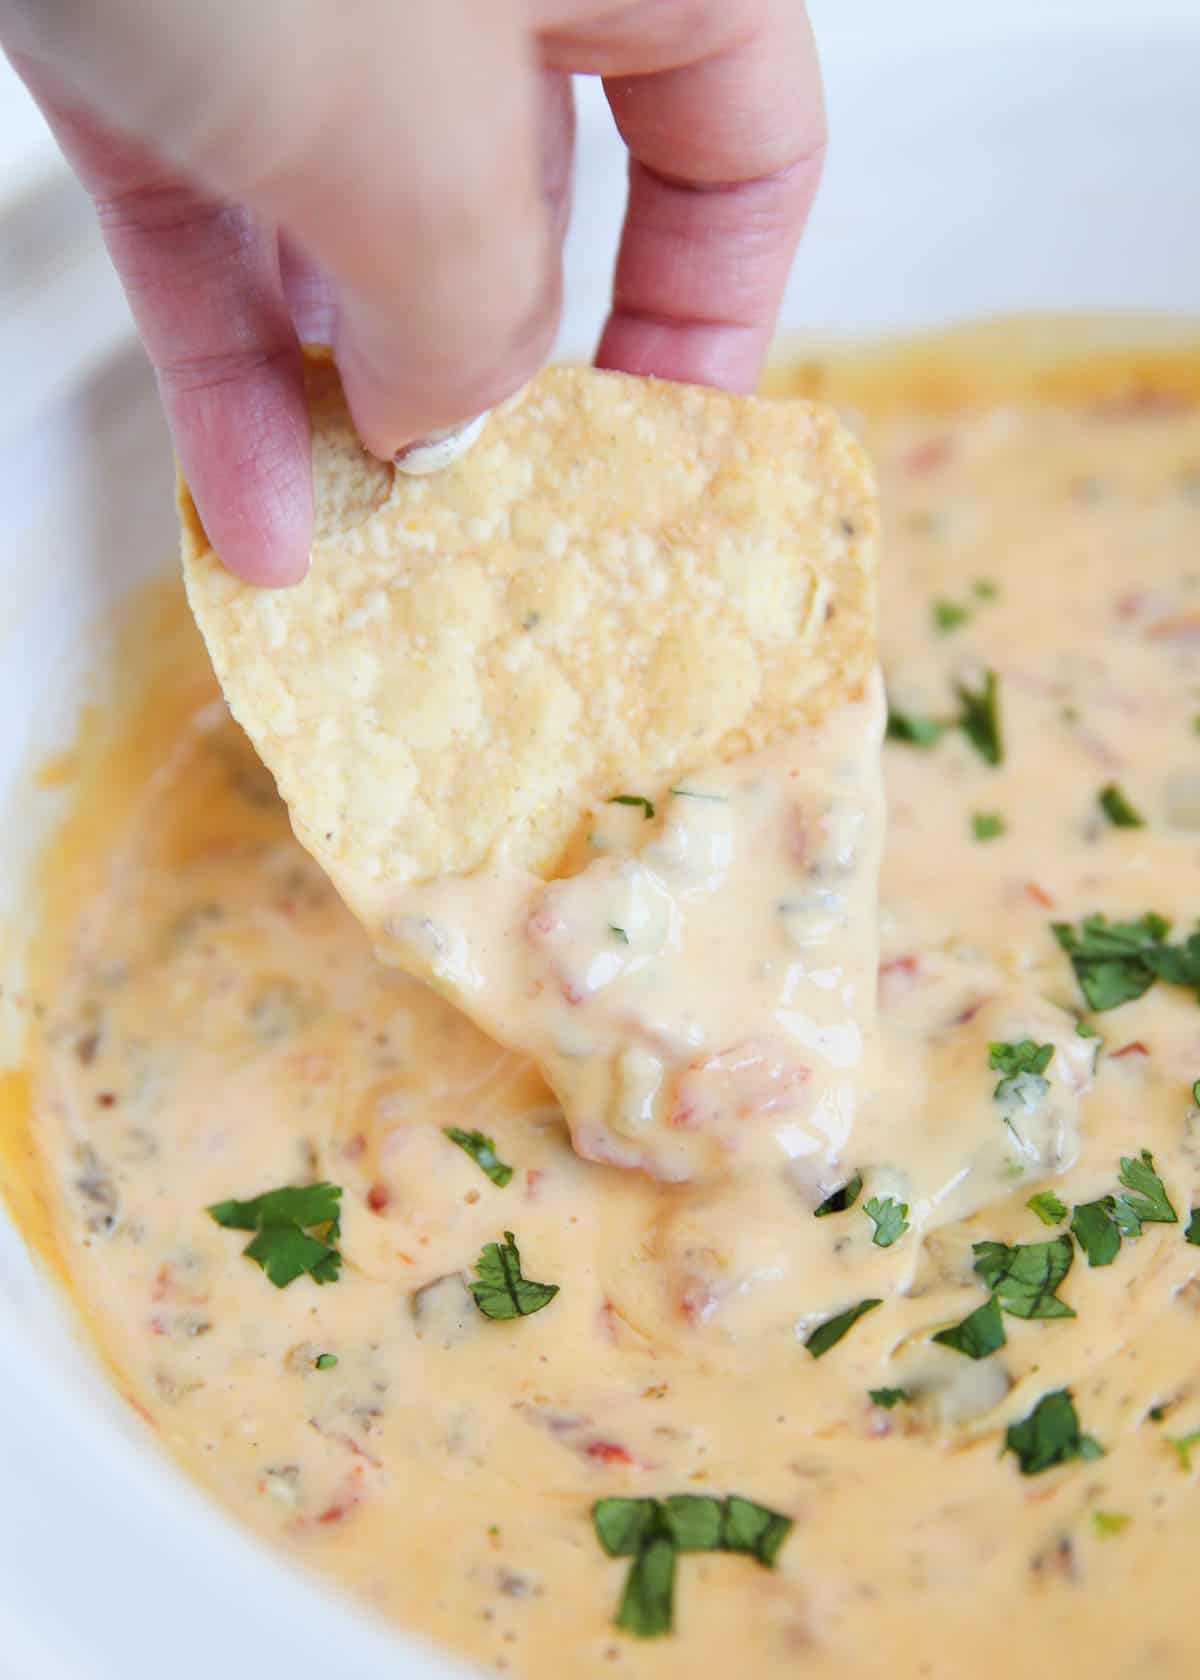 Dipping chip into rotel dip. 